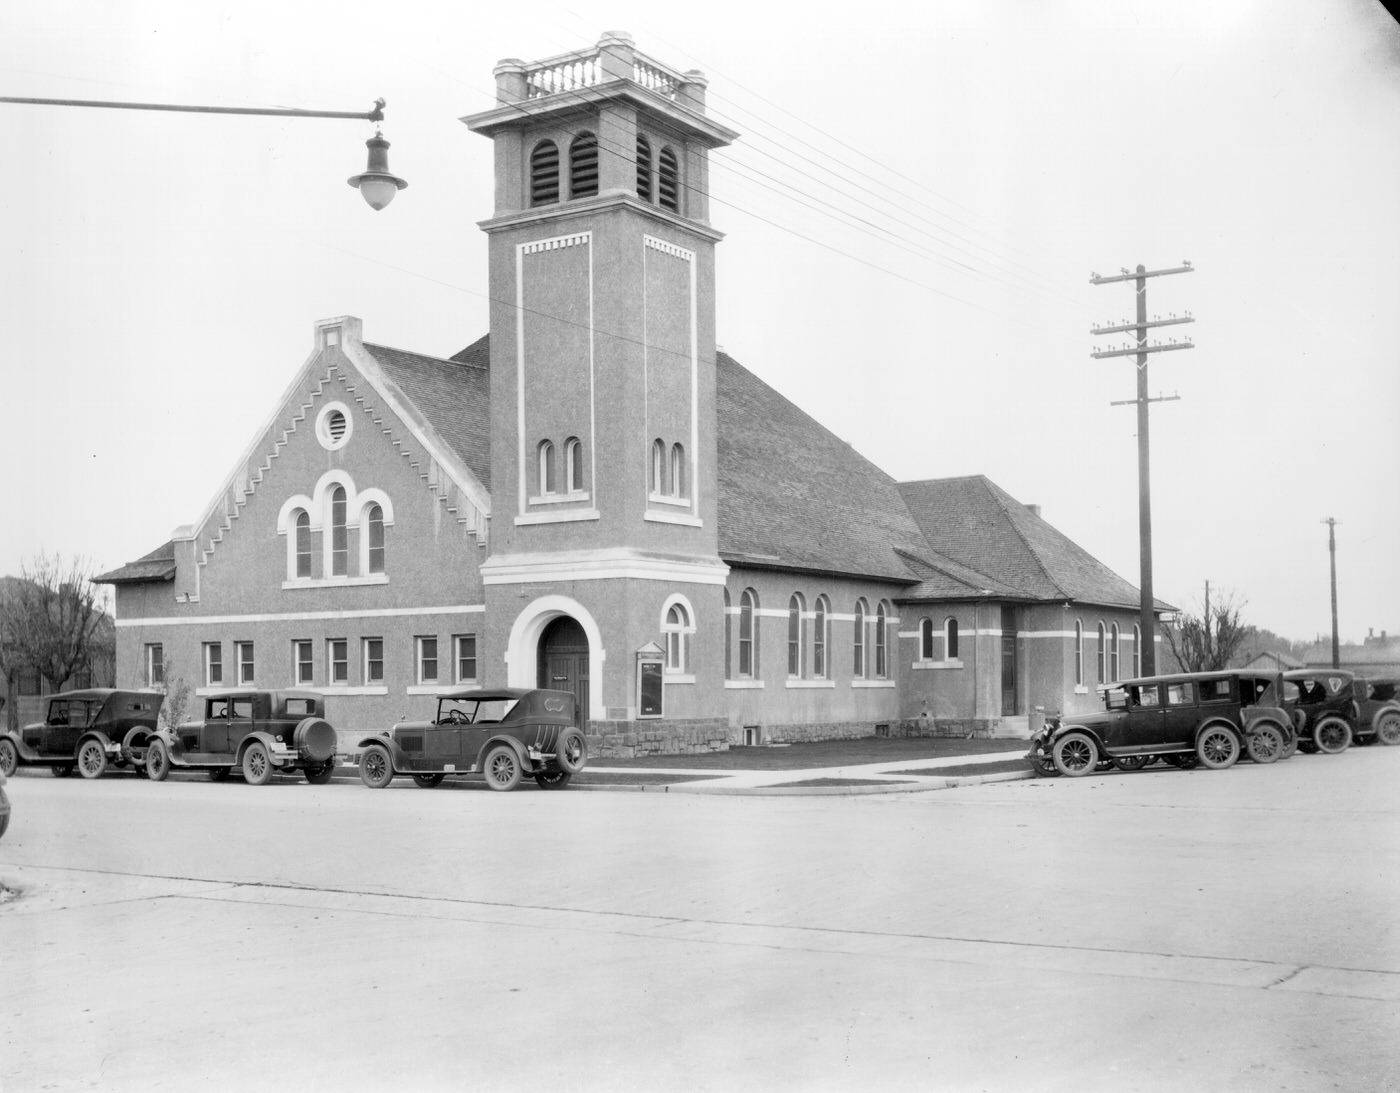 First Baptist Church Exterior, 1930s. This church was located at Monroe St. and Third Ave. in Phoenix